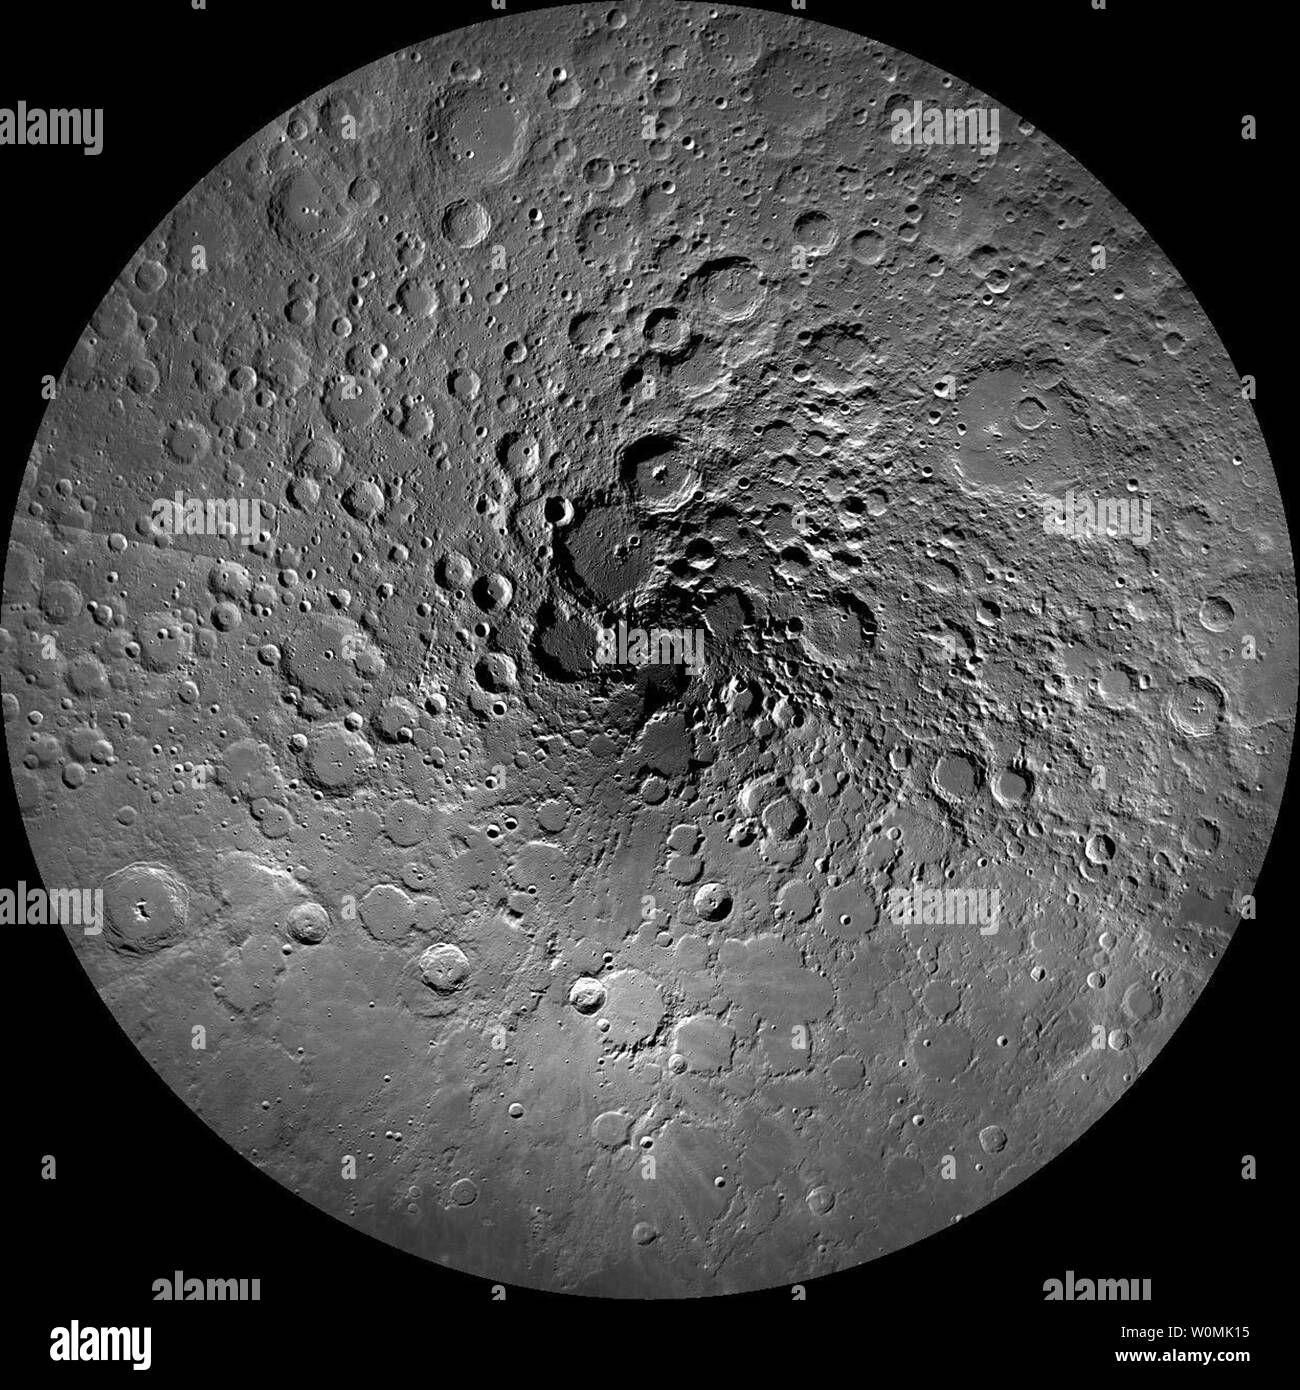 This image of the moon's north polar region was taken by the Lunar Reconnaissance Orbiter Camera, or LROC. One of the primary scientific objectives of LROC is to identify regions of permanent shadow and near-permanent illumination. Since the start of the mission, LROC has acquired thousands of Wide Angle Camera images approaching the north pole. From these images, scientists produced this mosaic, which is composed of 983 images taken over a one month period during northern summer.    UPI/NASA/GSFC/Arizona State University Stock Photo